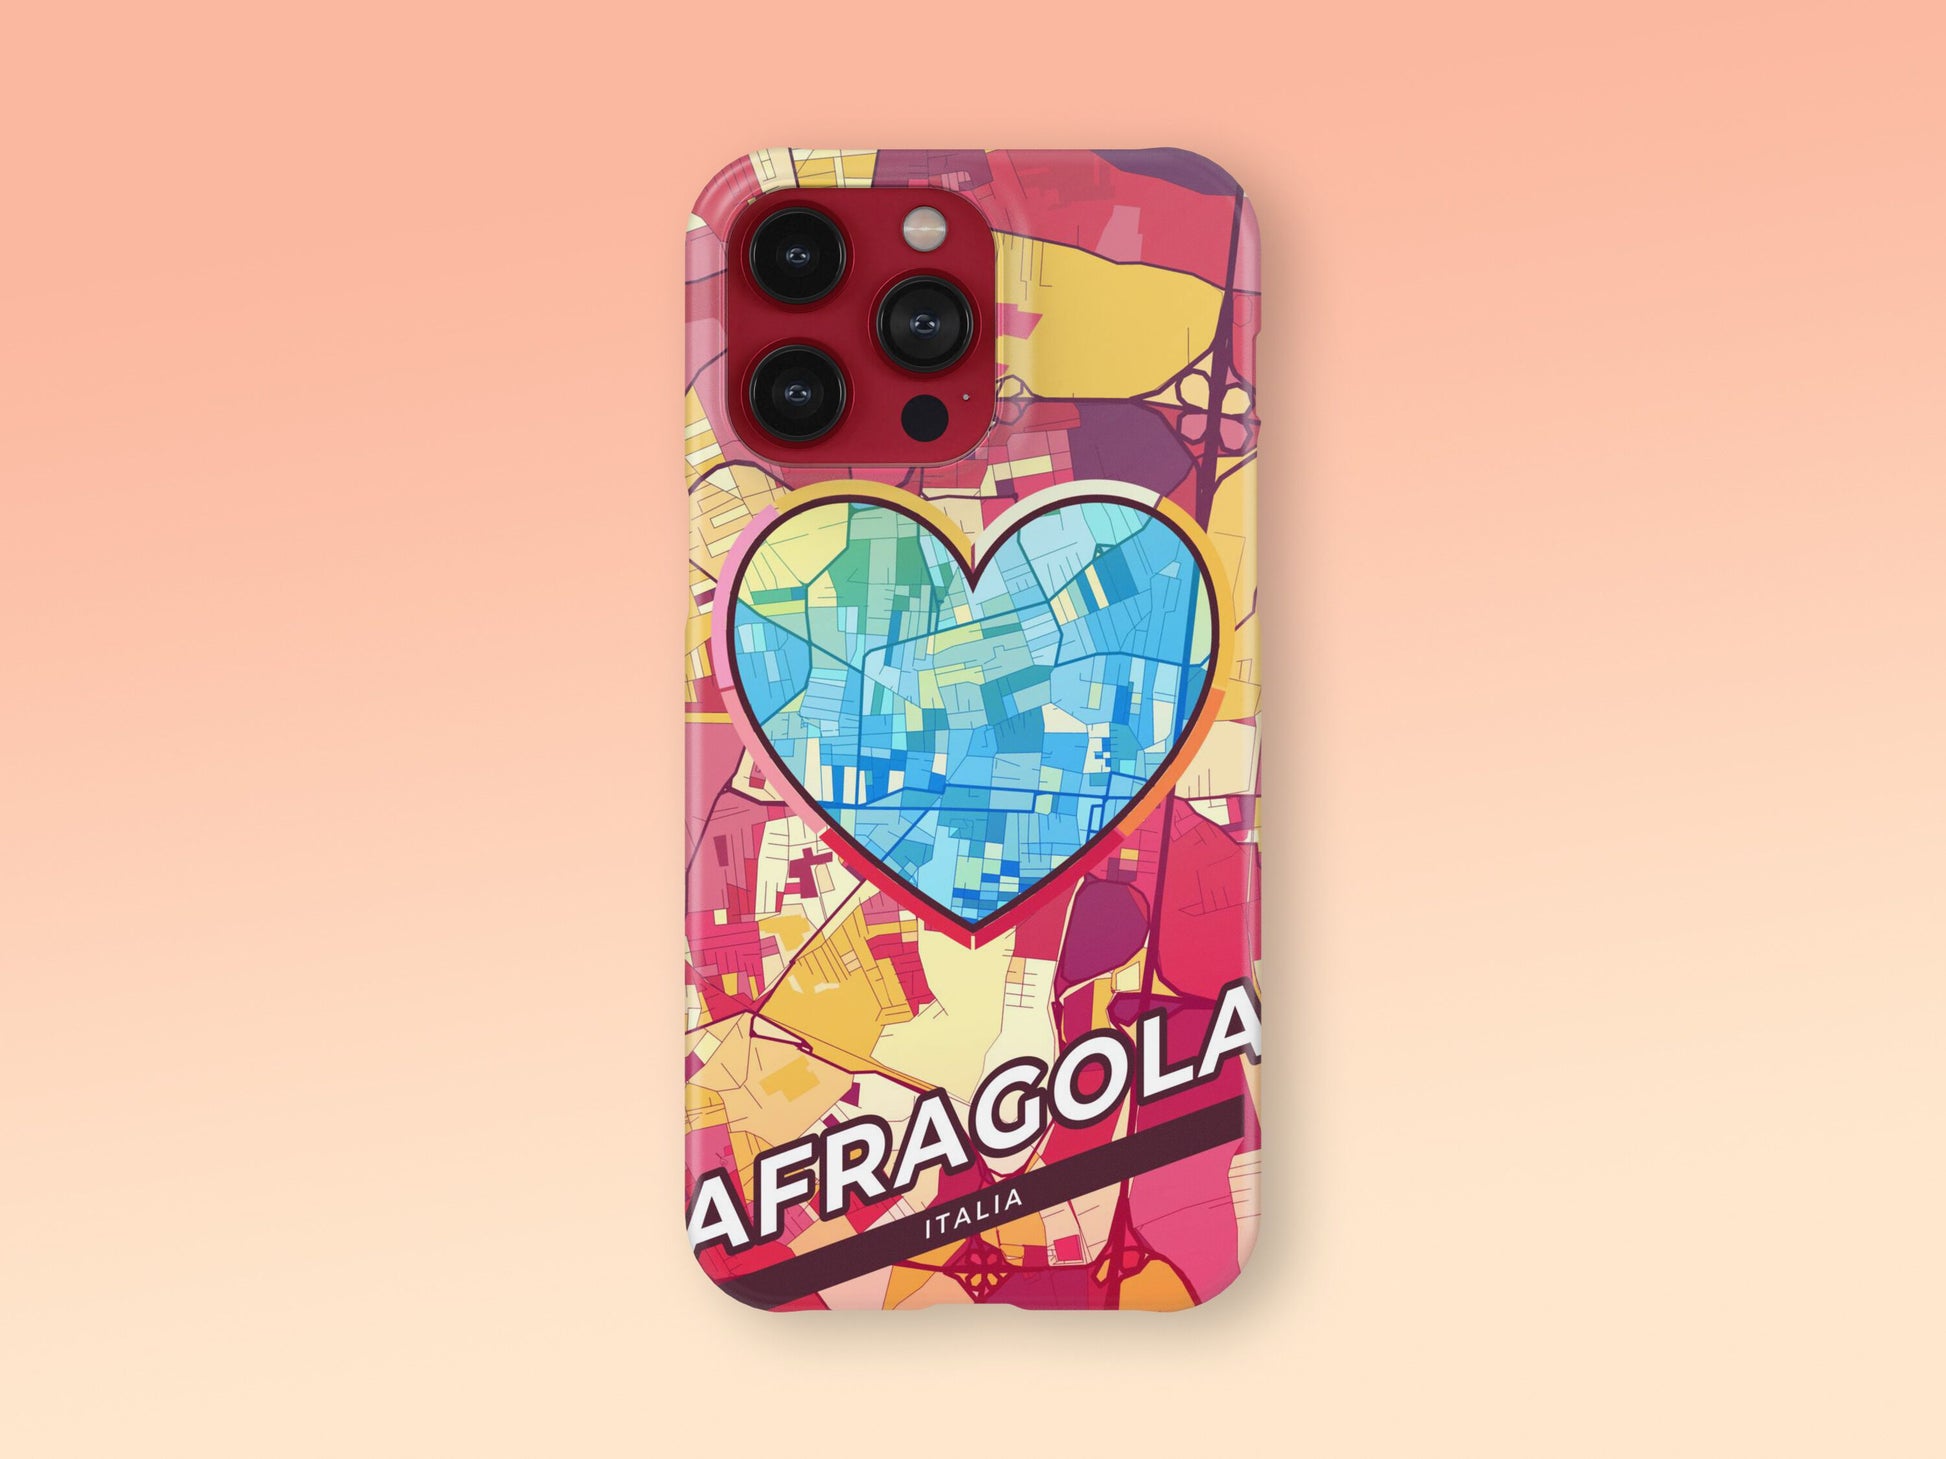 Afragola Italy slim phone case with colorful icon. Birthday, wedding or housewarming gift. Couple match cases. 2